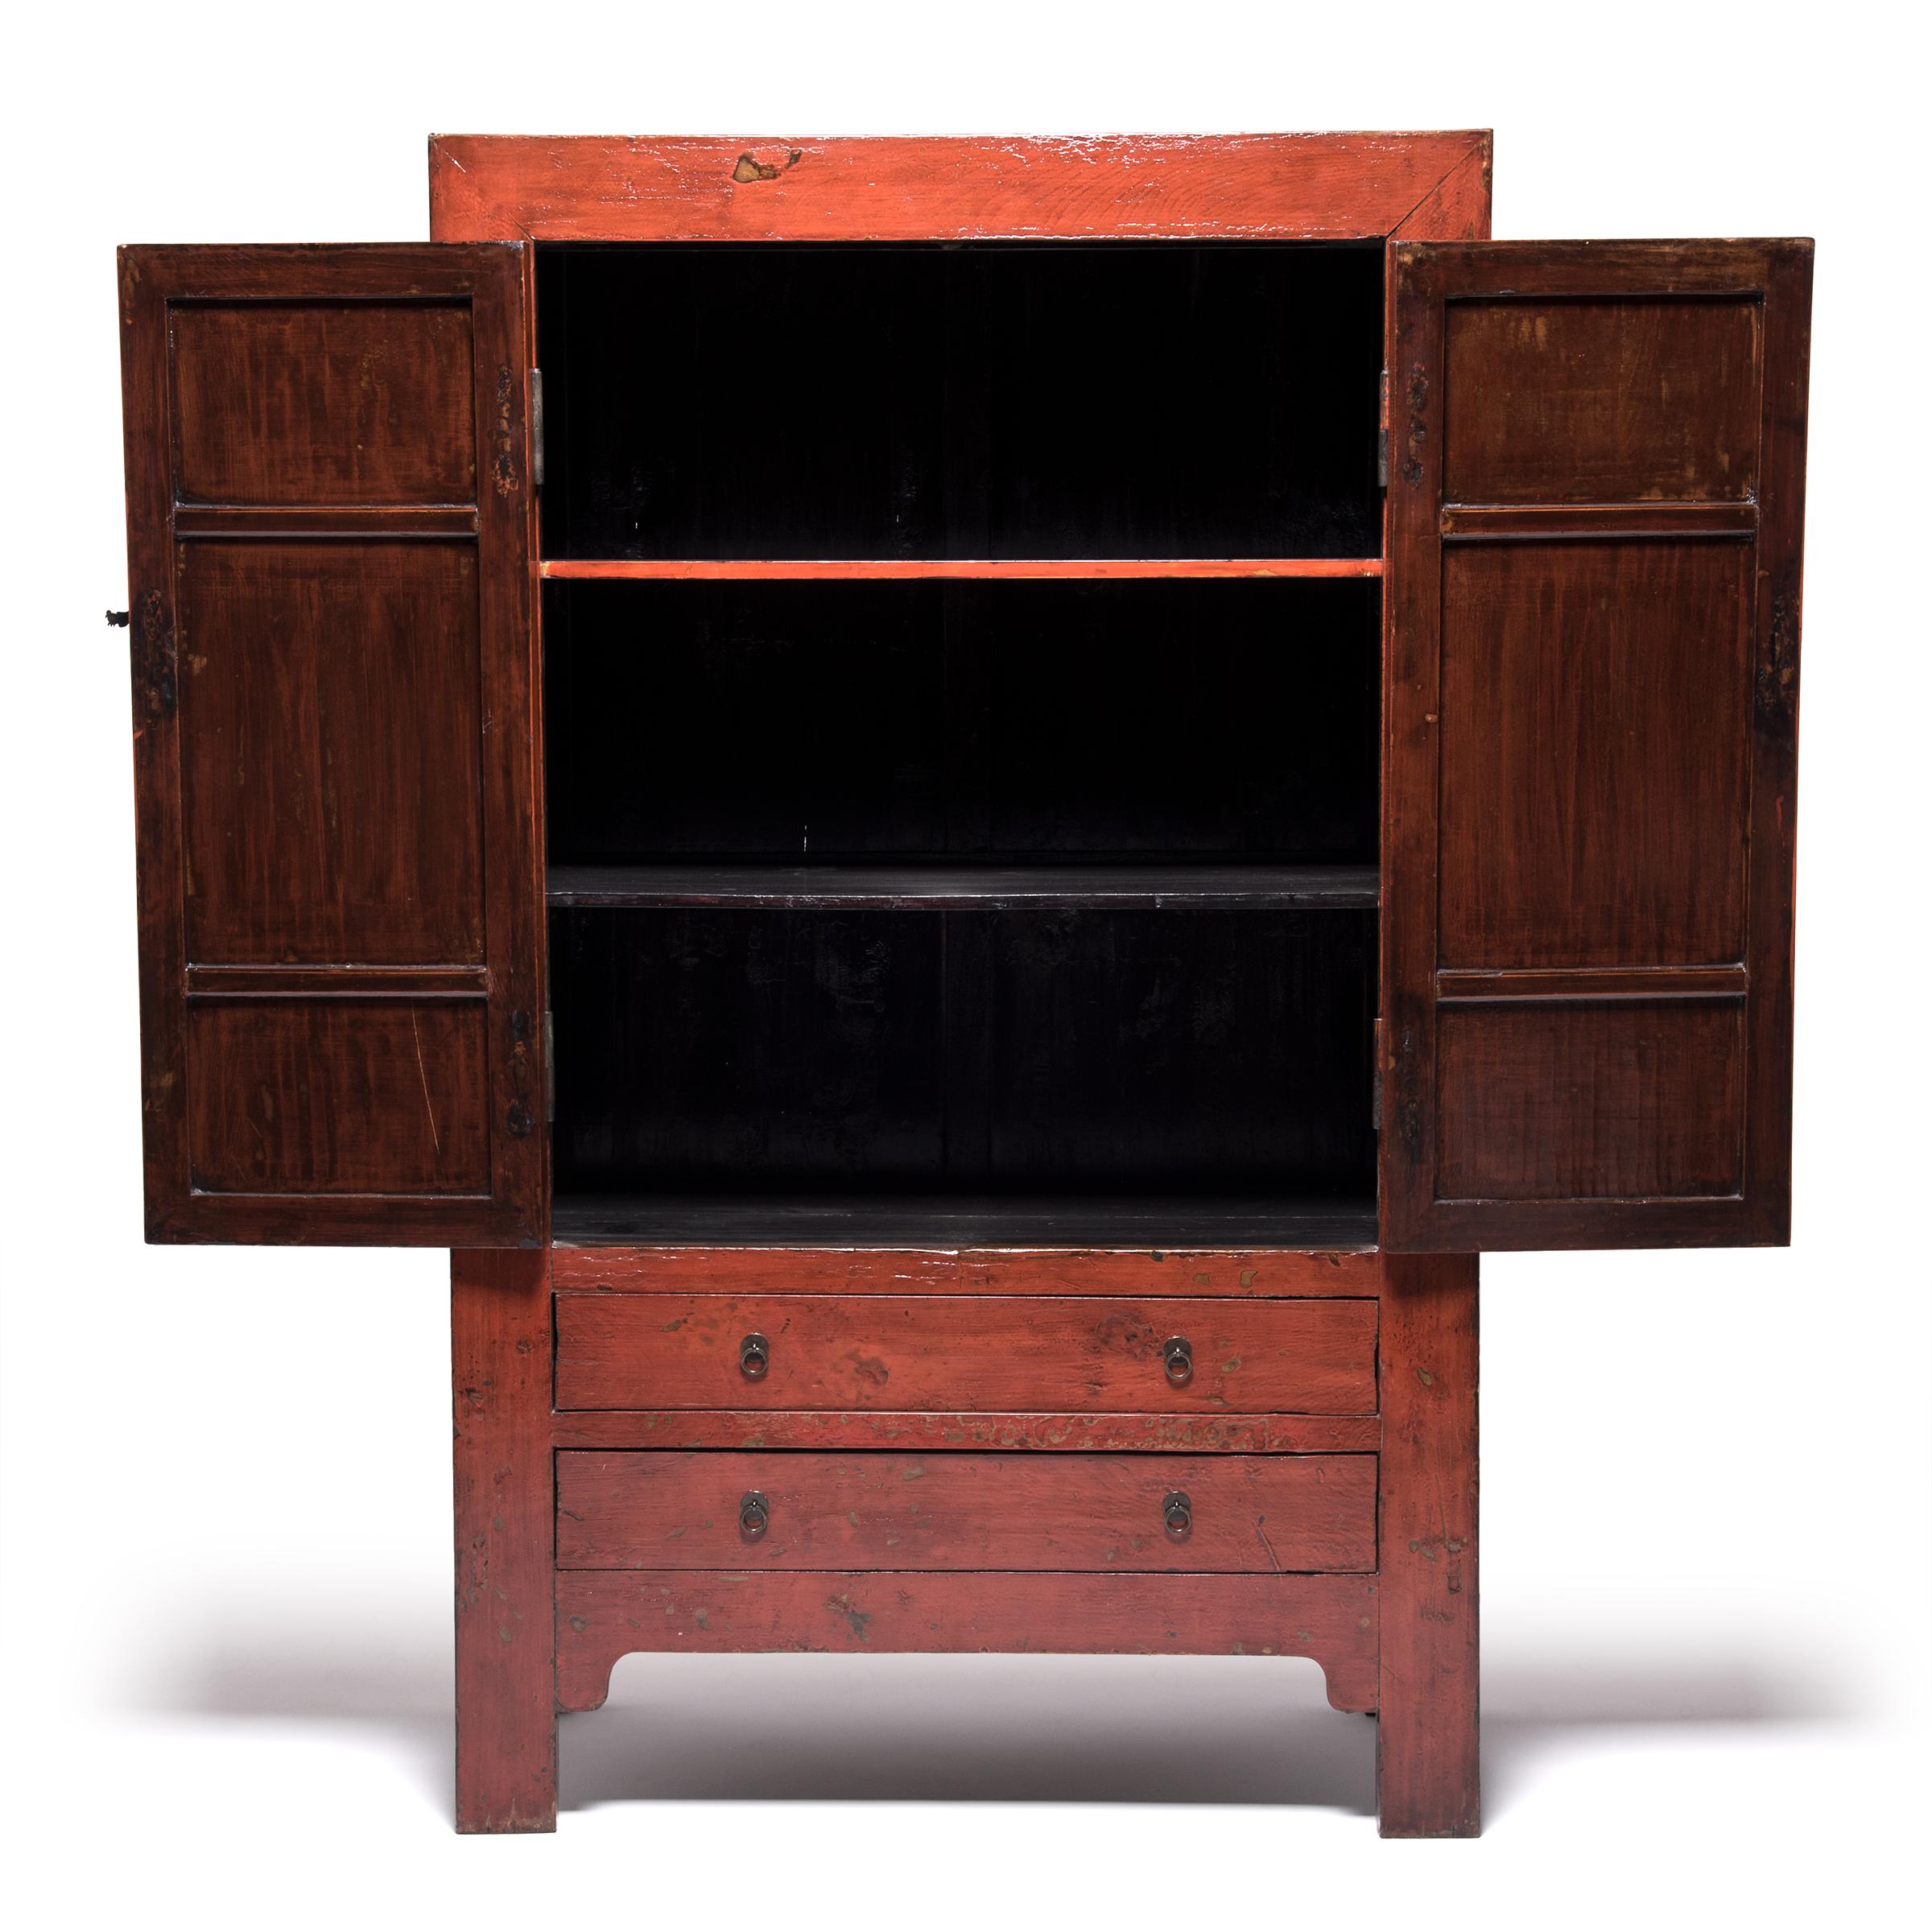 Made in northern China during the mid-19th century, this tall cabinet was likely part of wedding dowry, bestowed upon a groom filled with silks and gifts. Constructed with mortise and Tenon joinery, the Elmwood square-corner cabinet embodies the